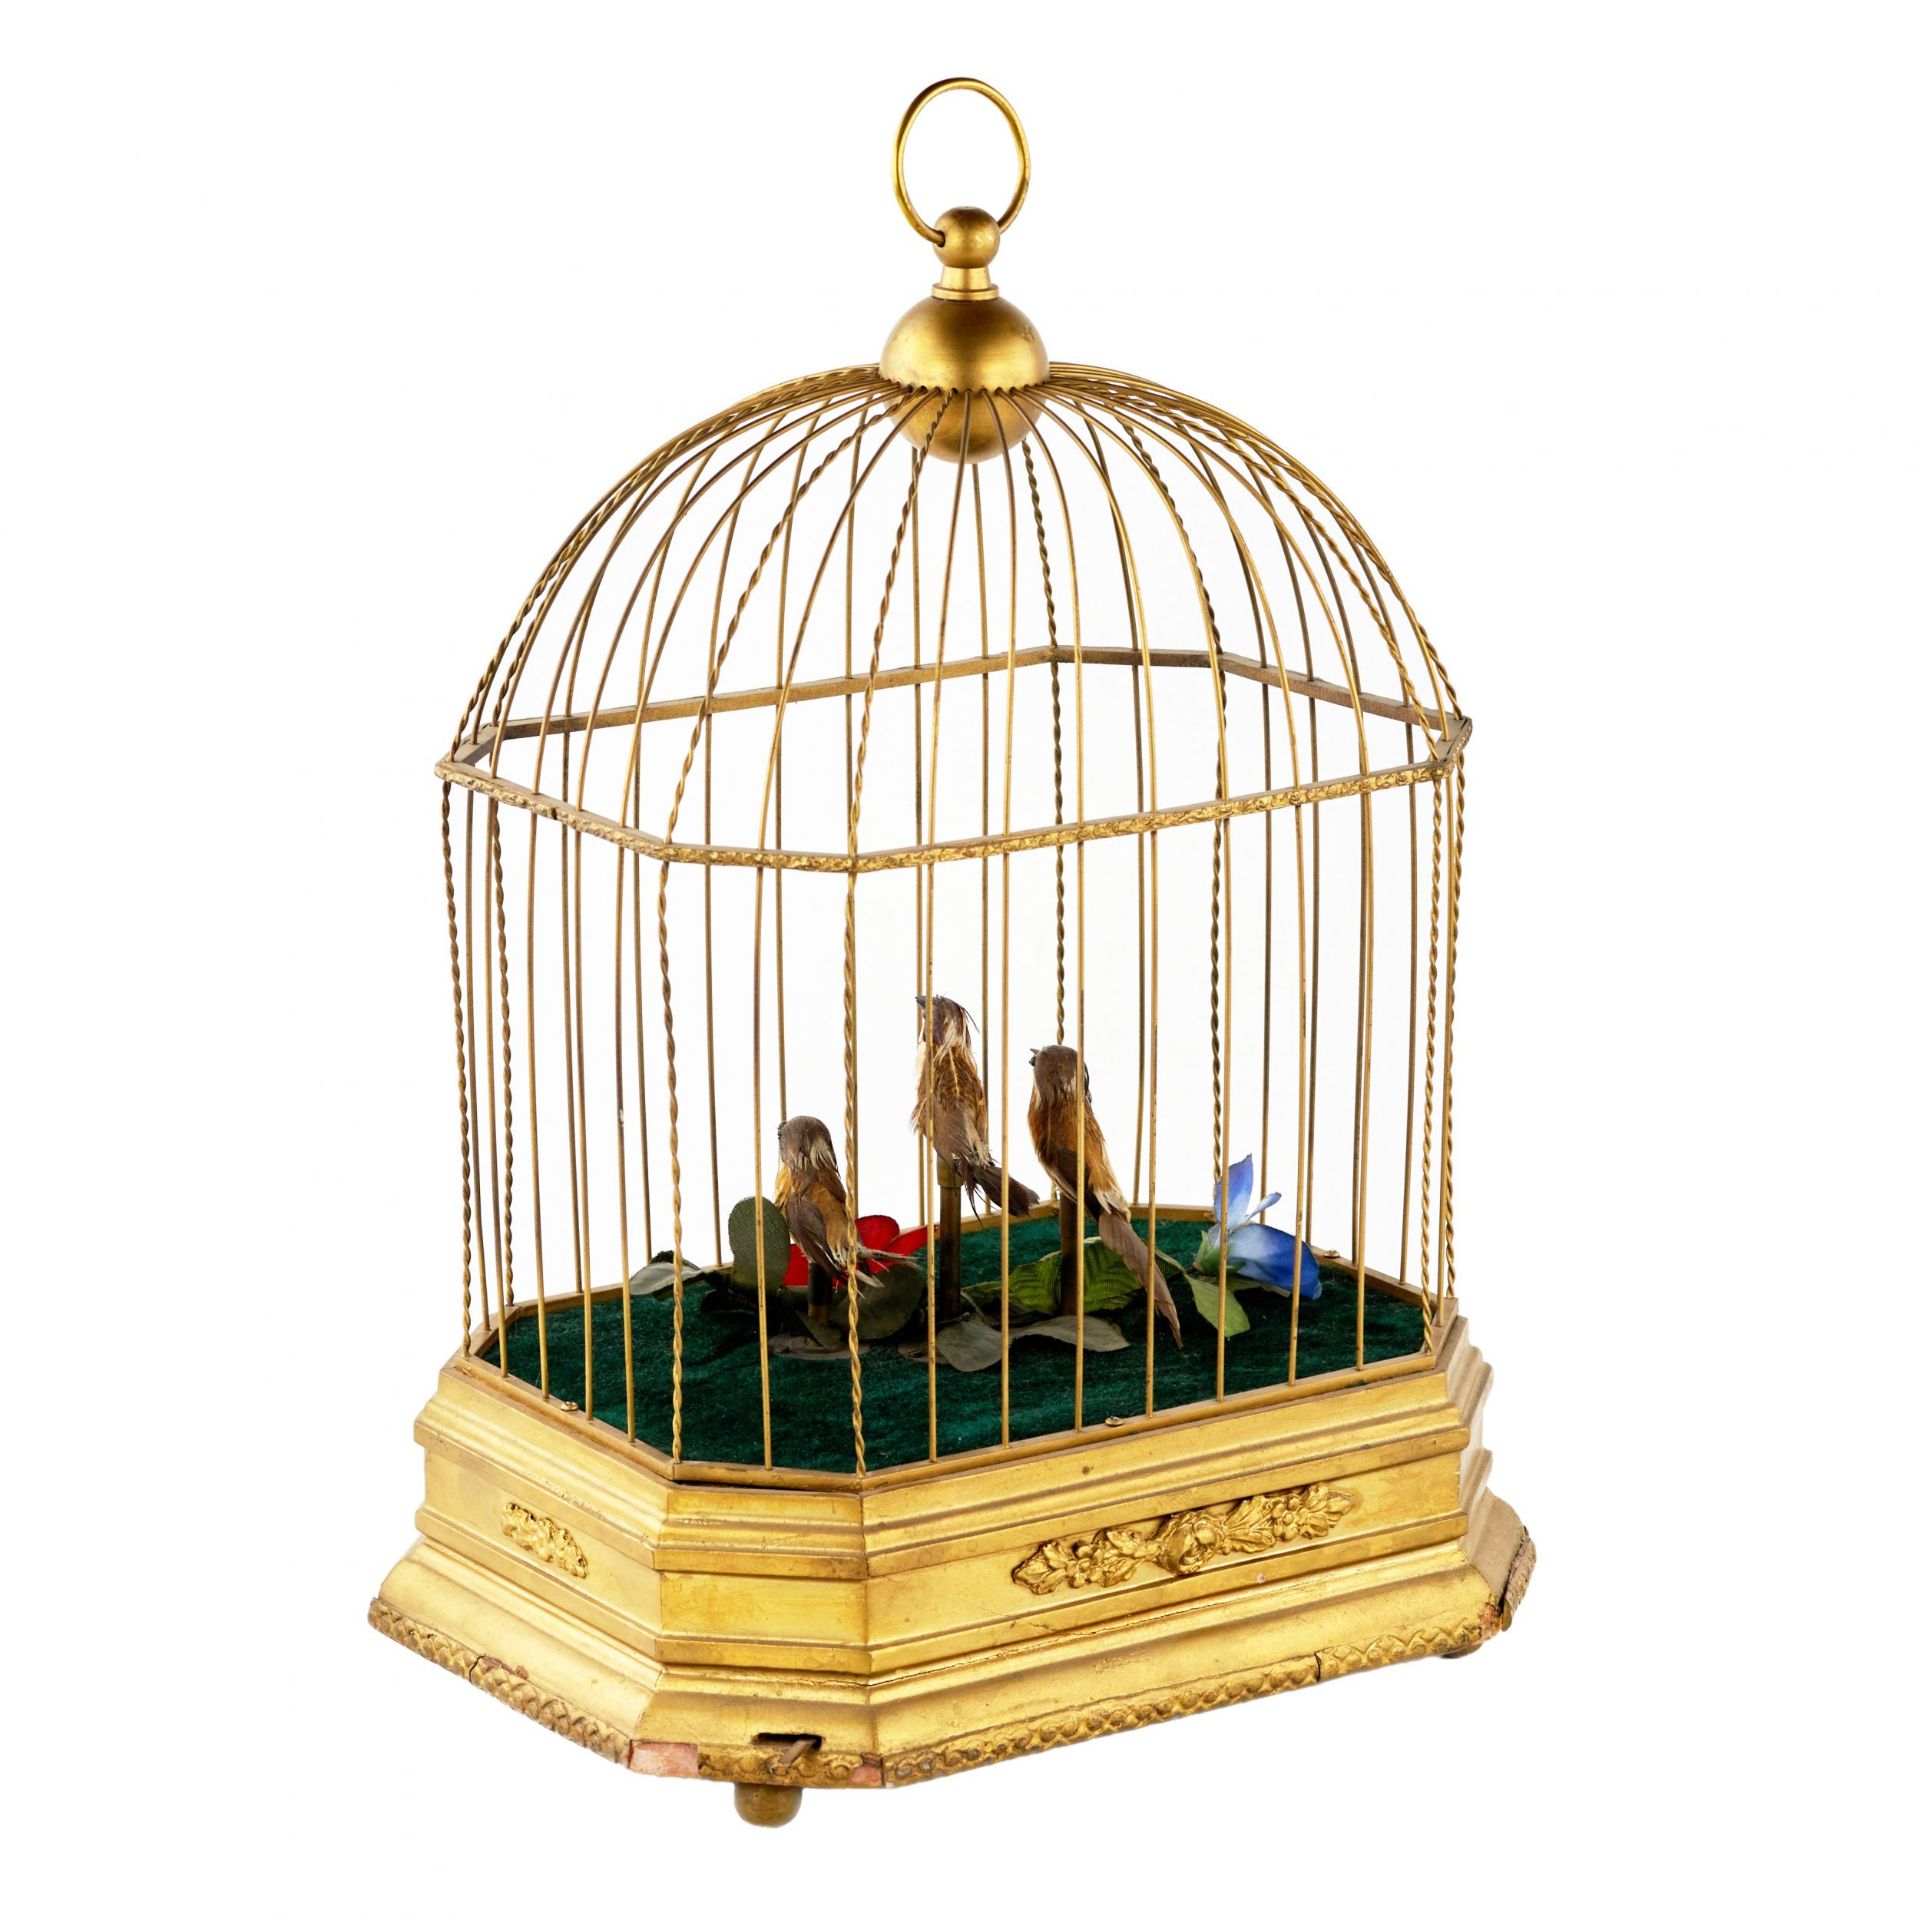 Musical toy - Cage with birds. - Image 4 of 6